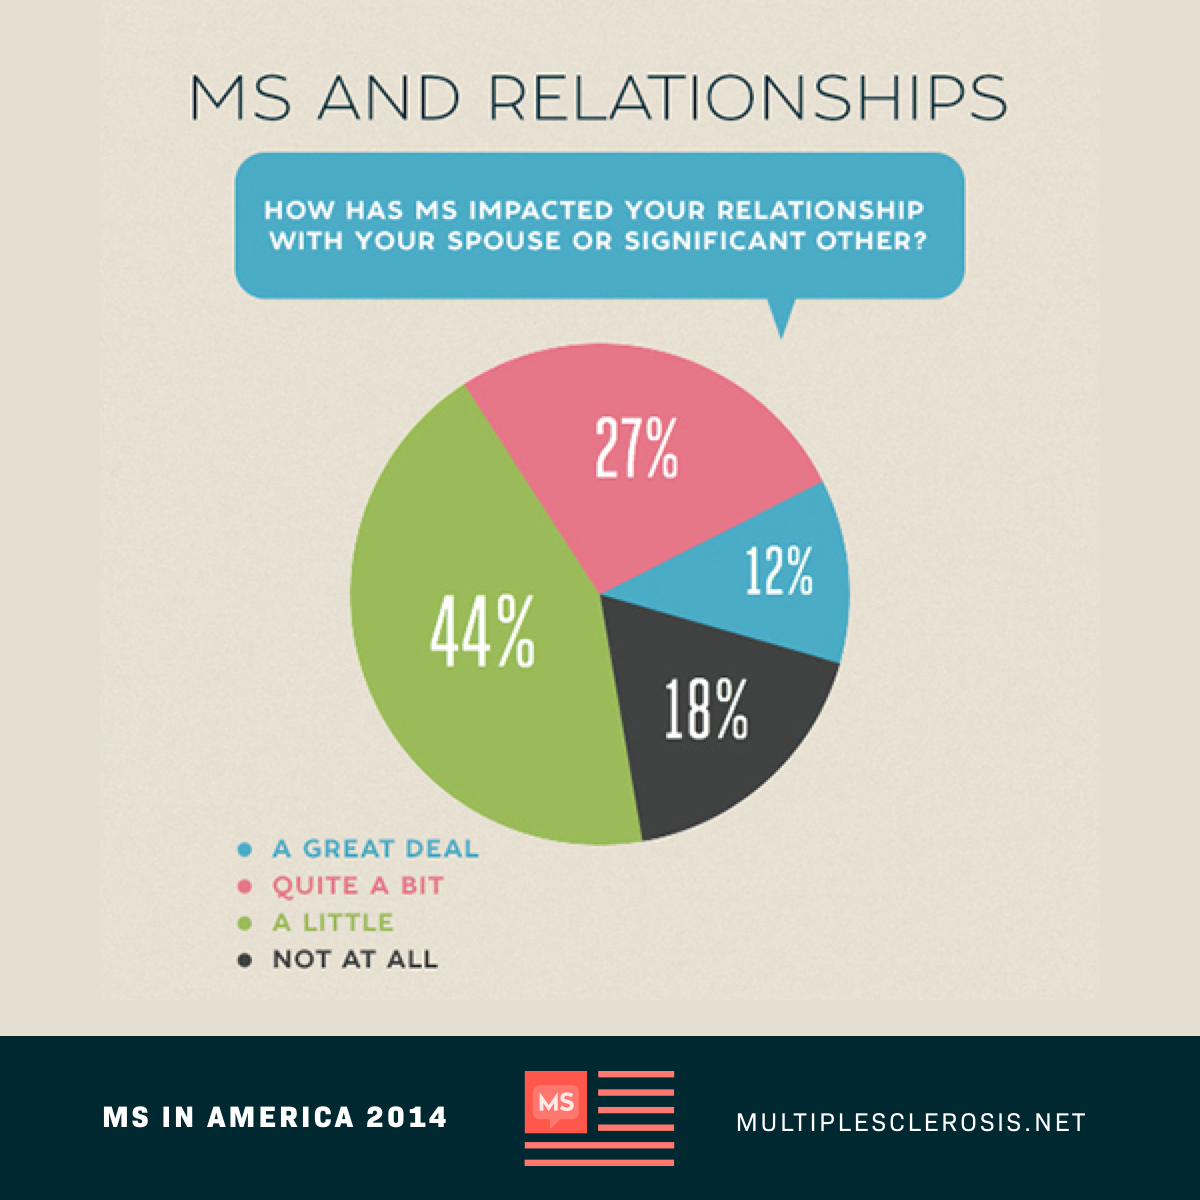 Pie chart showing how MS has impacted relationships of participants